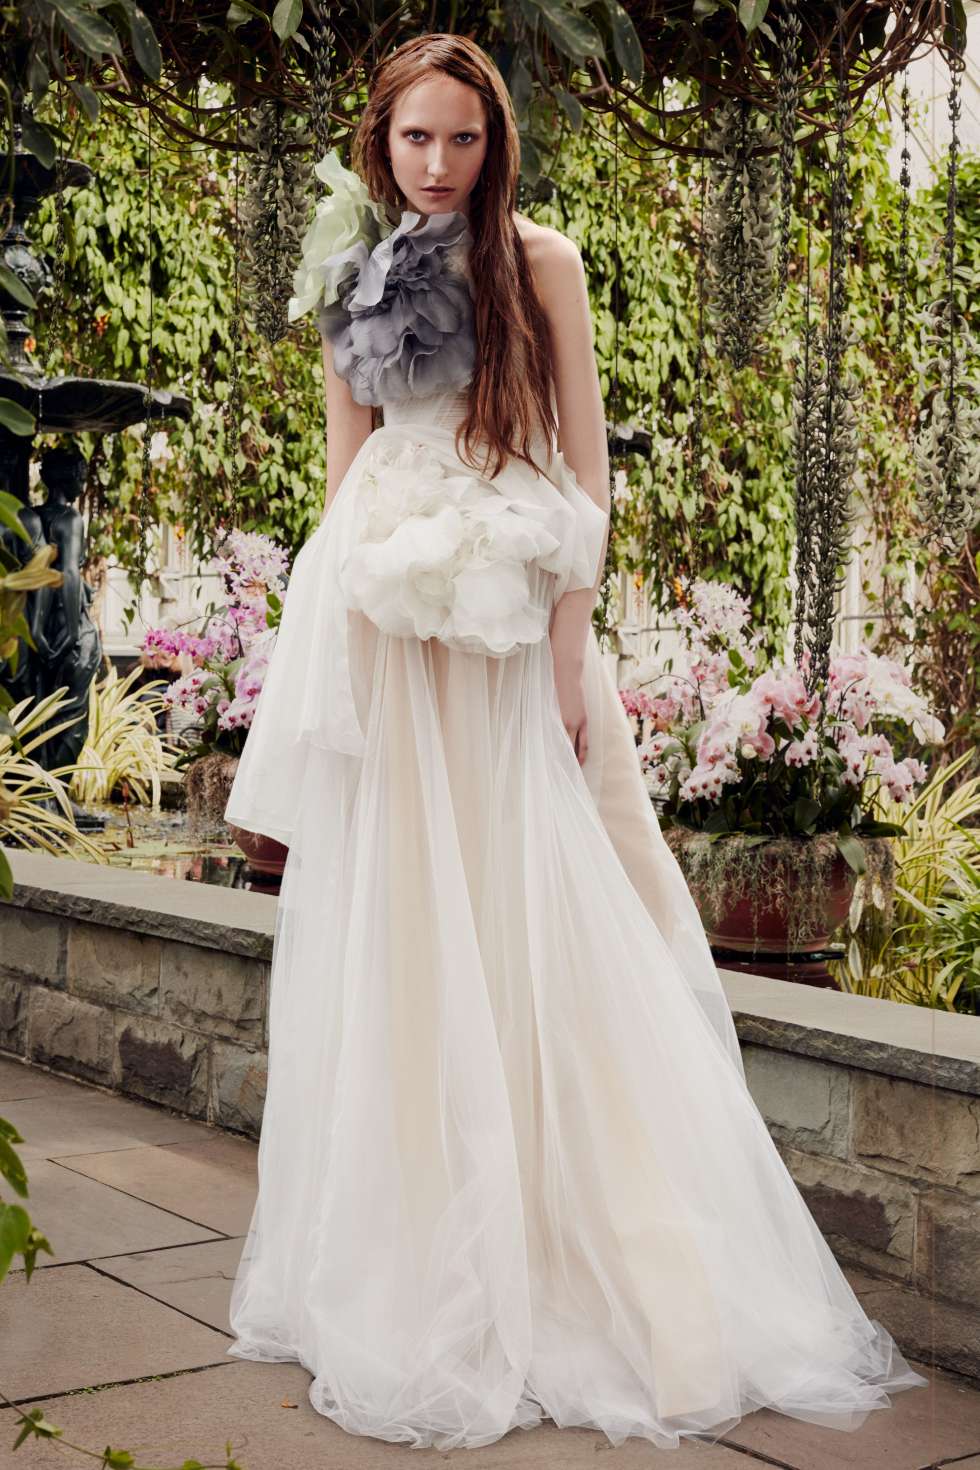 The 2020 Wedding Dress Collection by Vera Wang